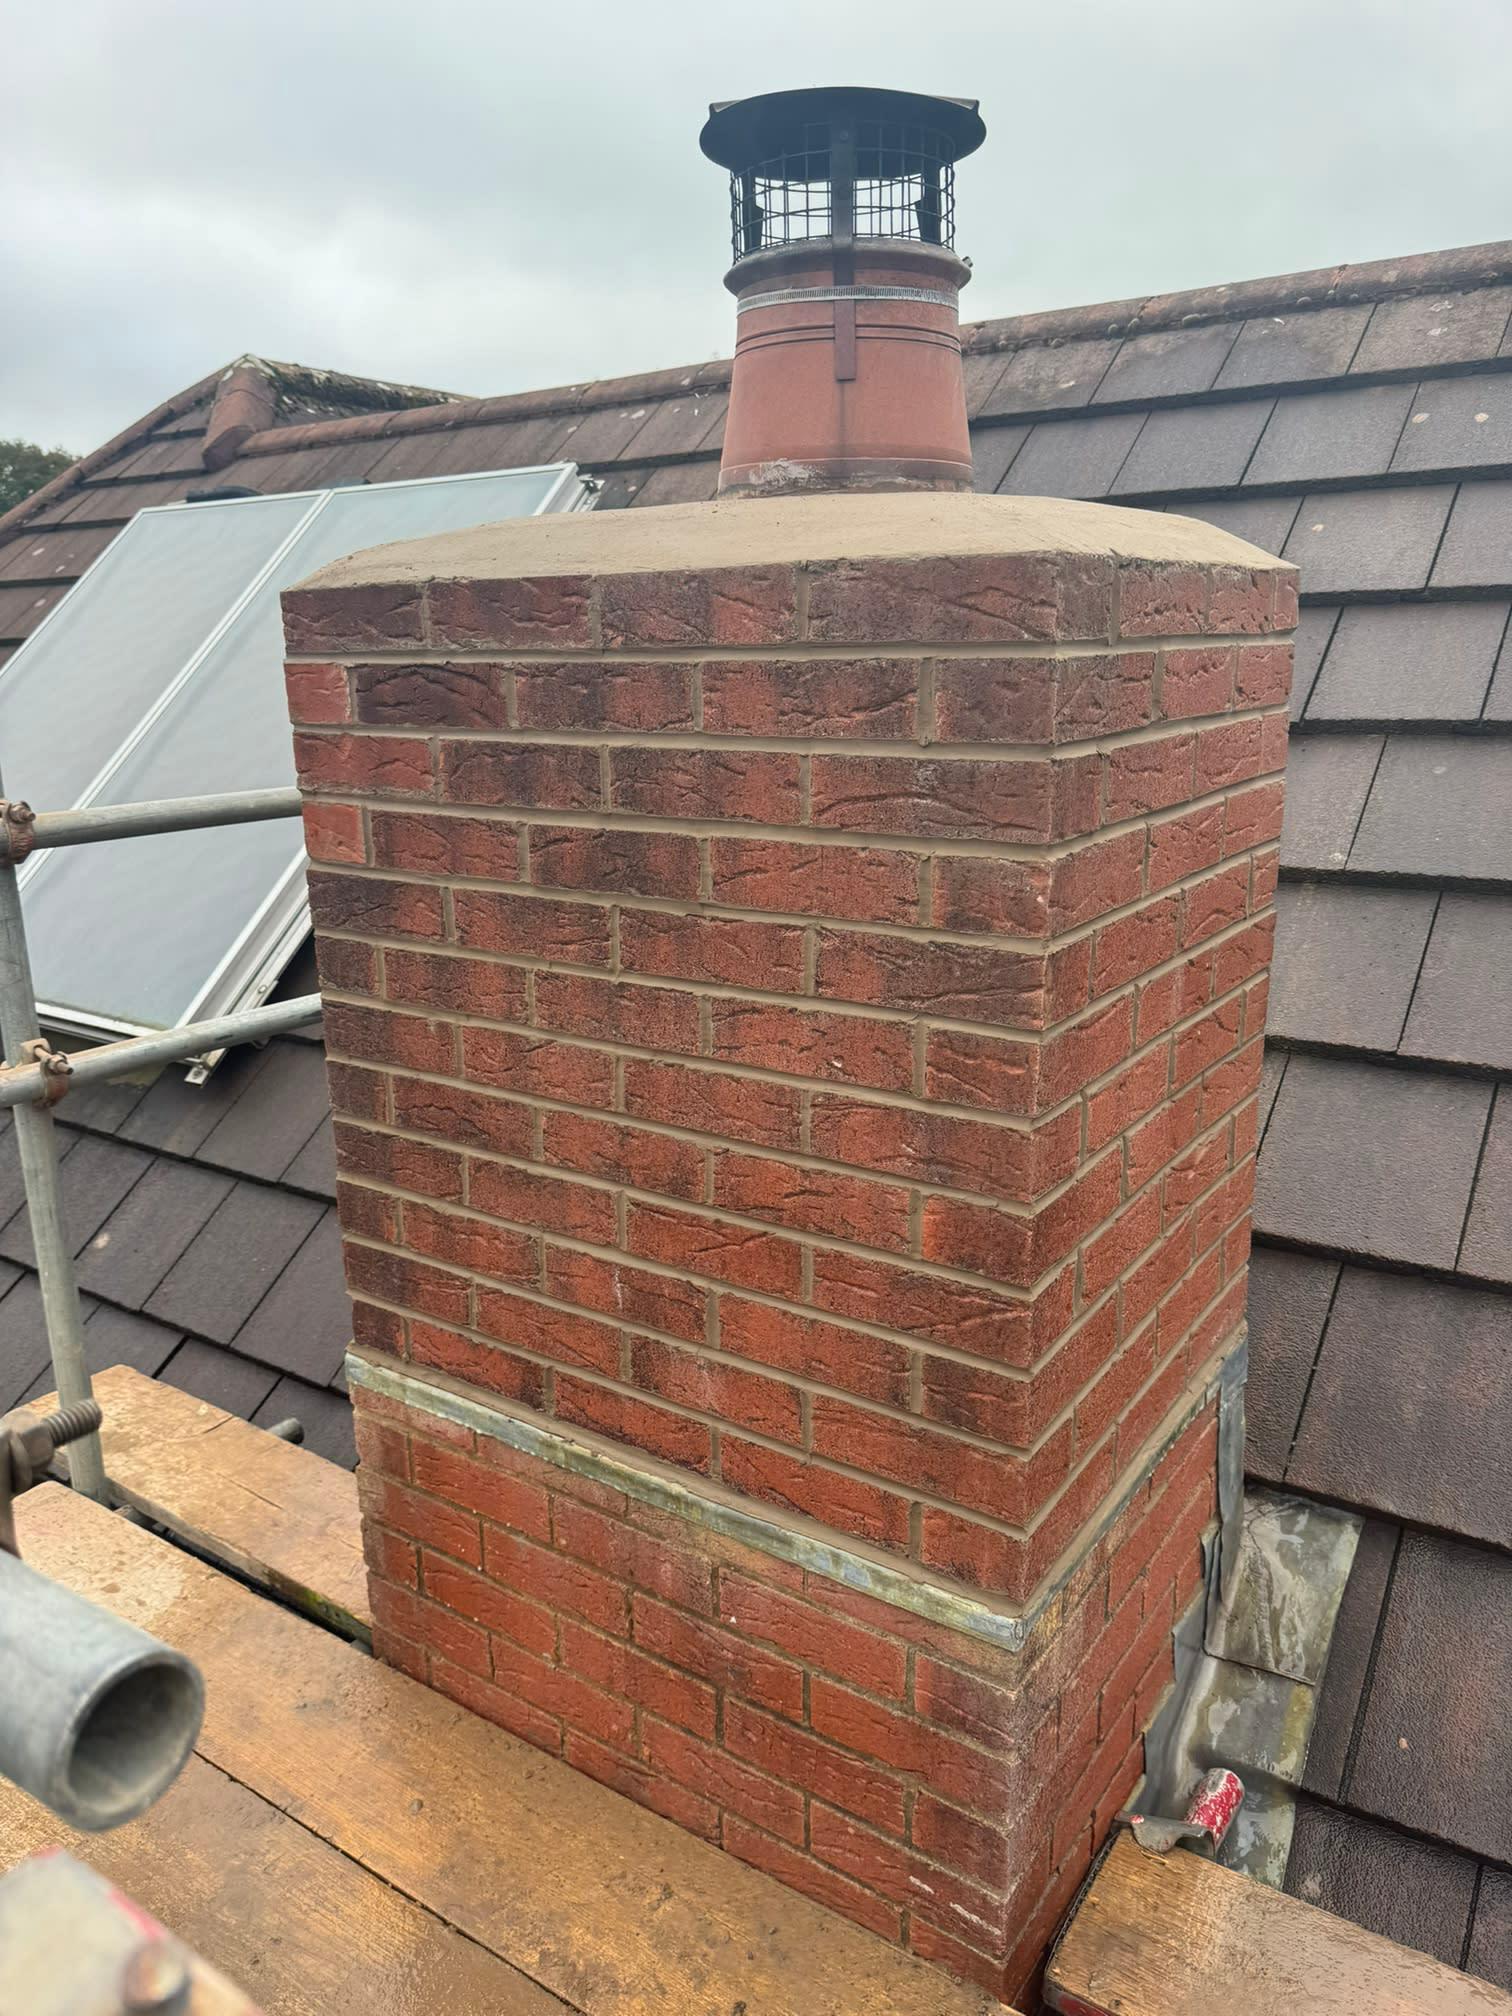 Images AM Brickwork & Pointing Specialists Ltd